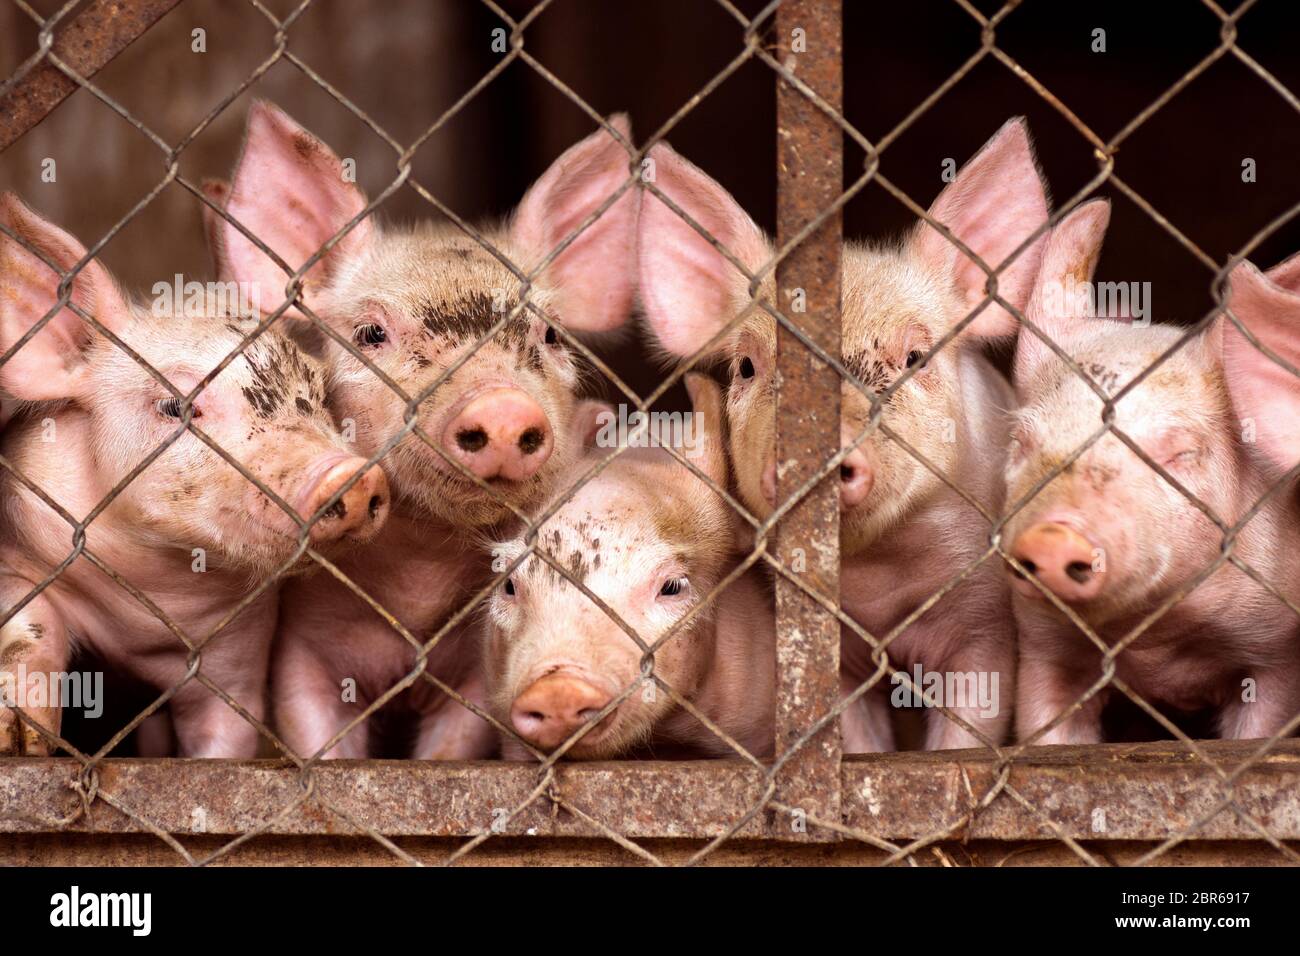 The little young cute pigs are looking at camera from pigsty through grid, pig and swine breeding concept. Stock Photo